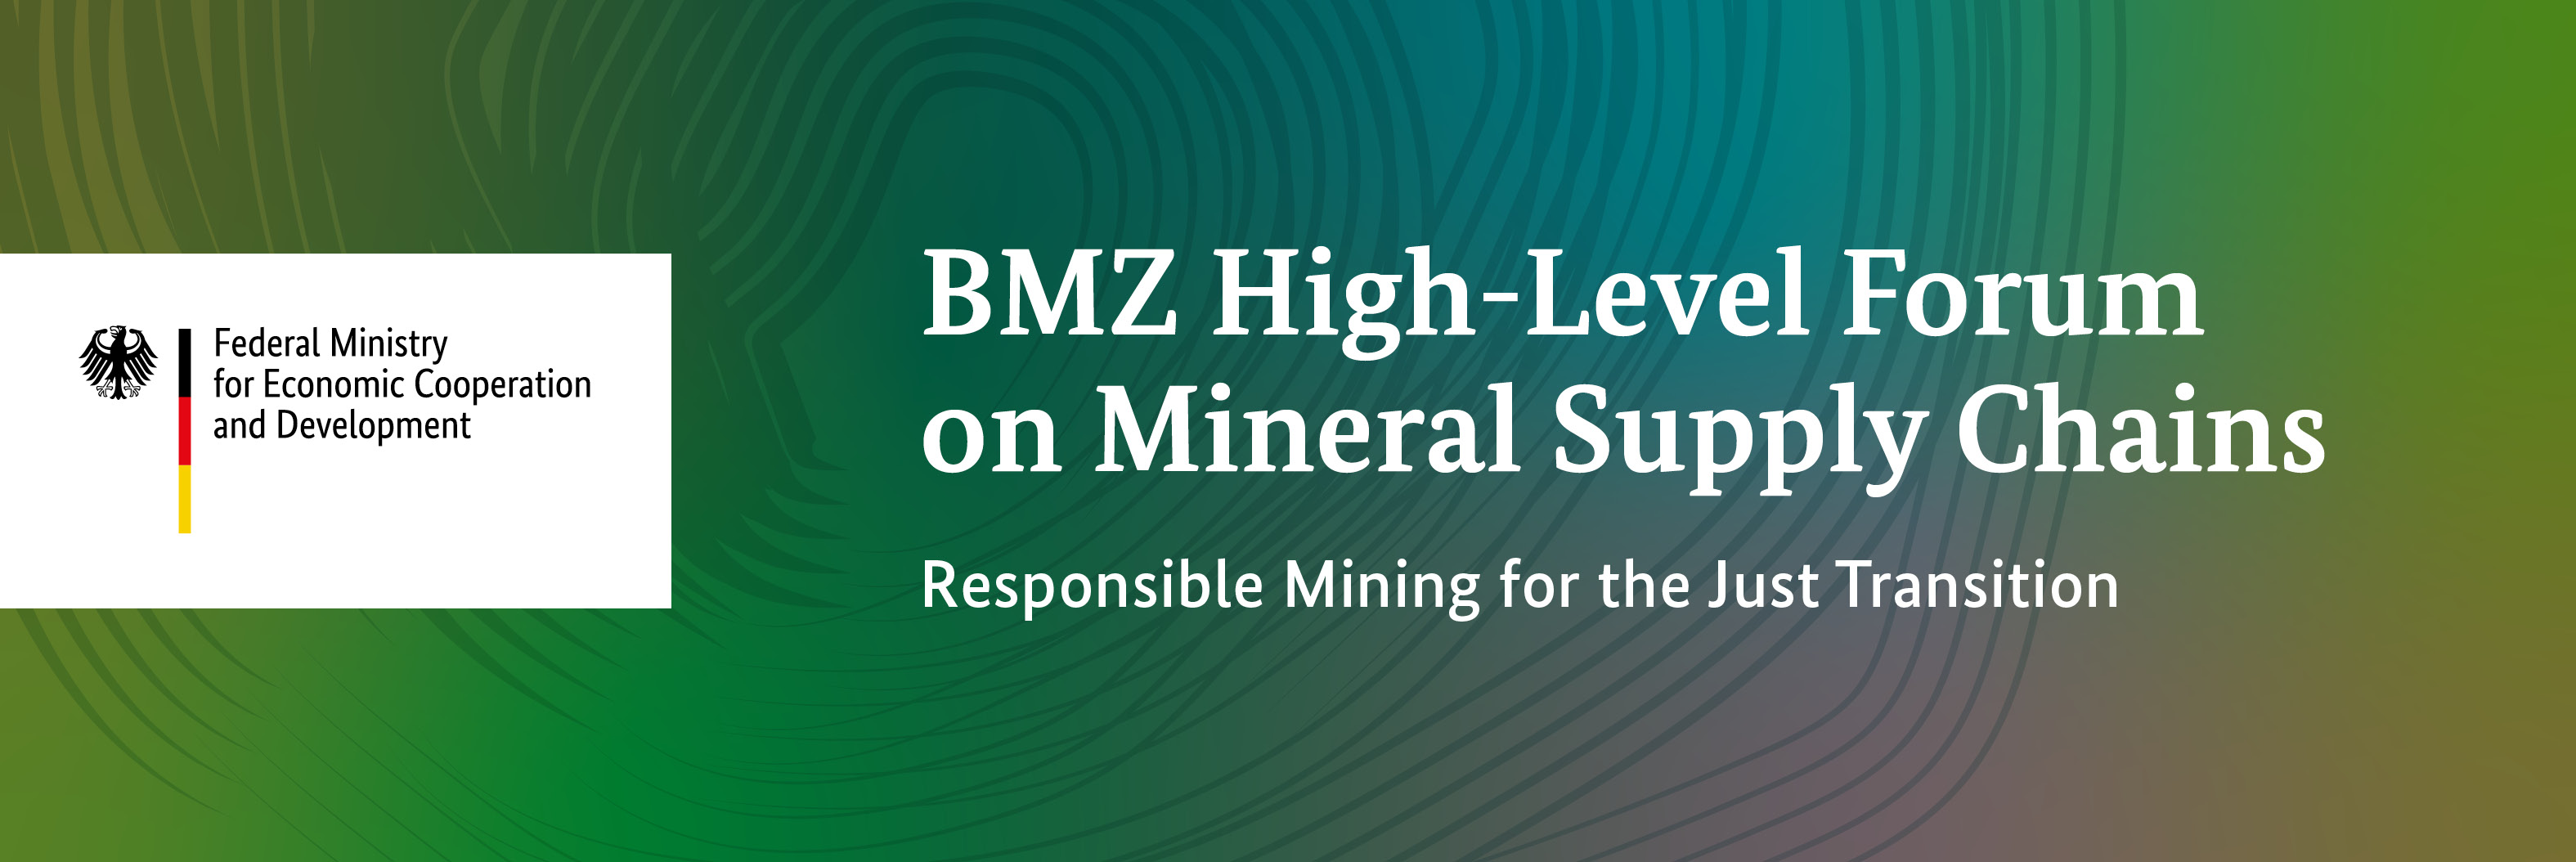 BMZ High-Level Forum "Mineral Supply Chains - Responsible Mining for the Just Transition"